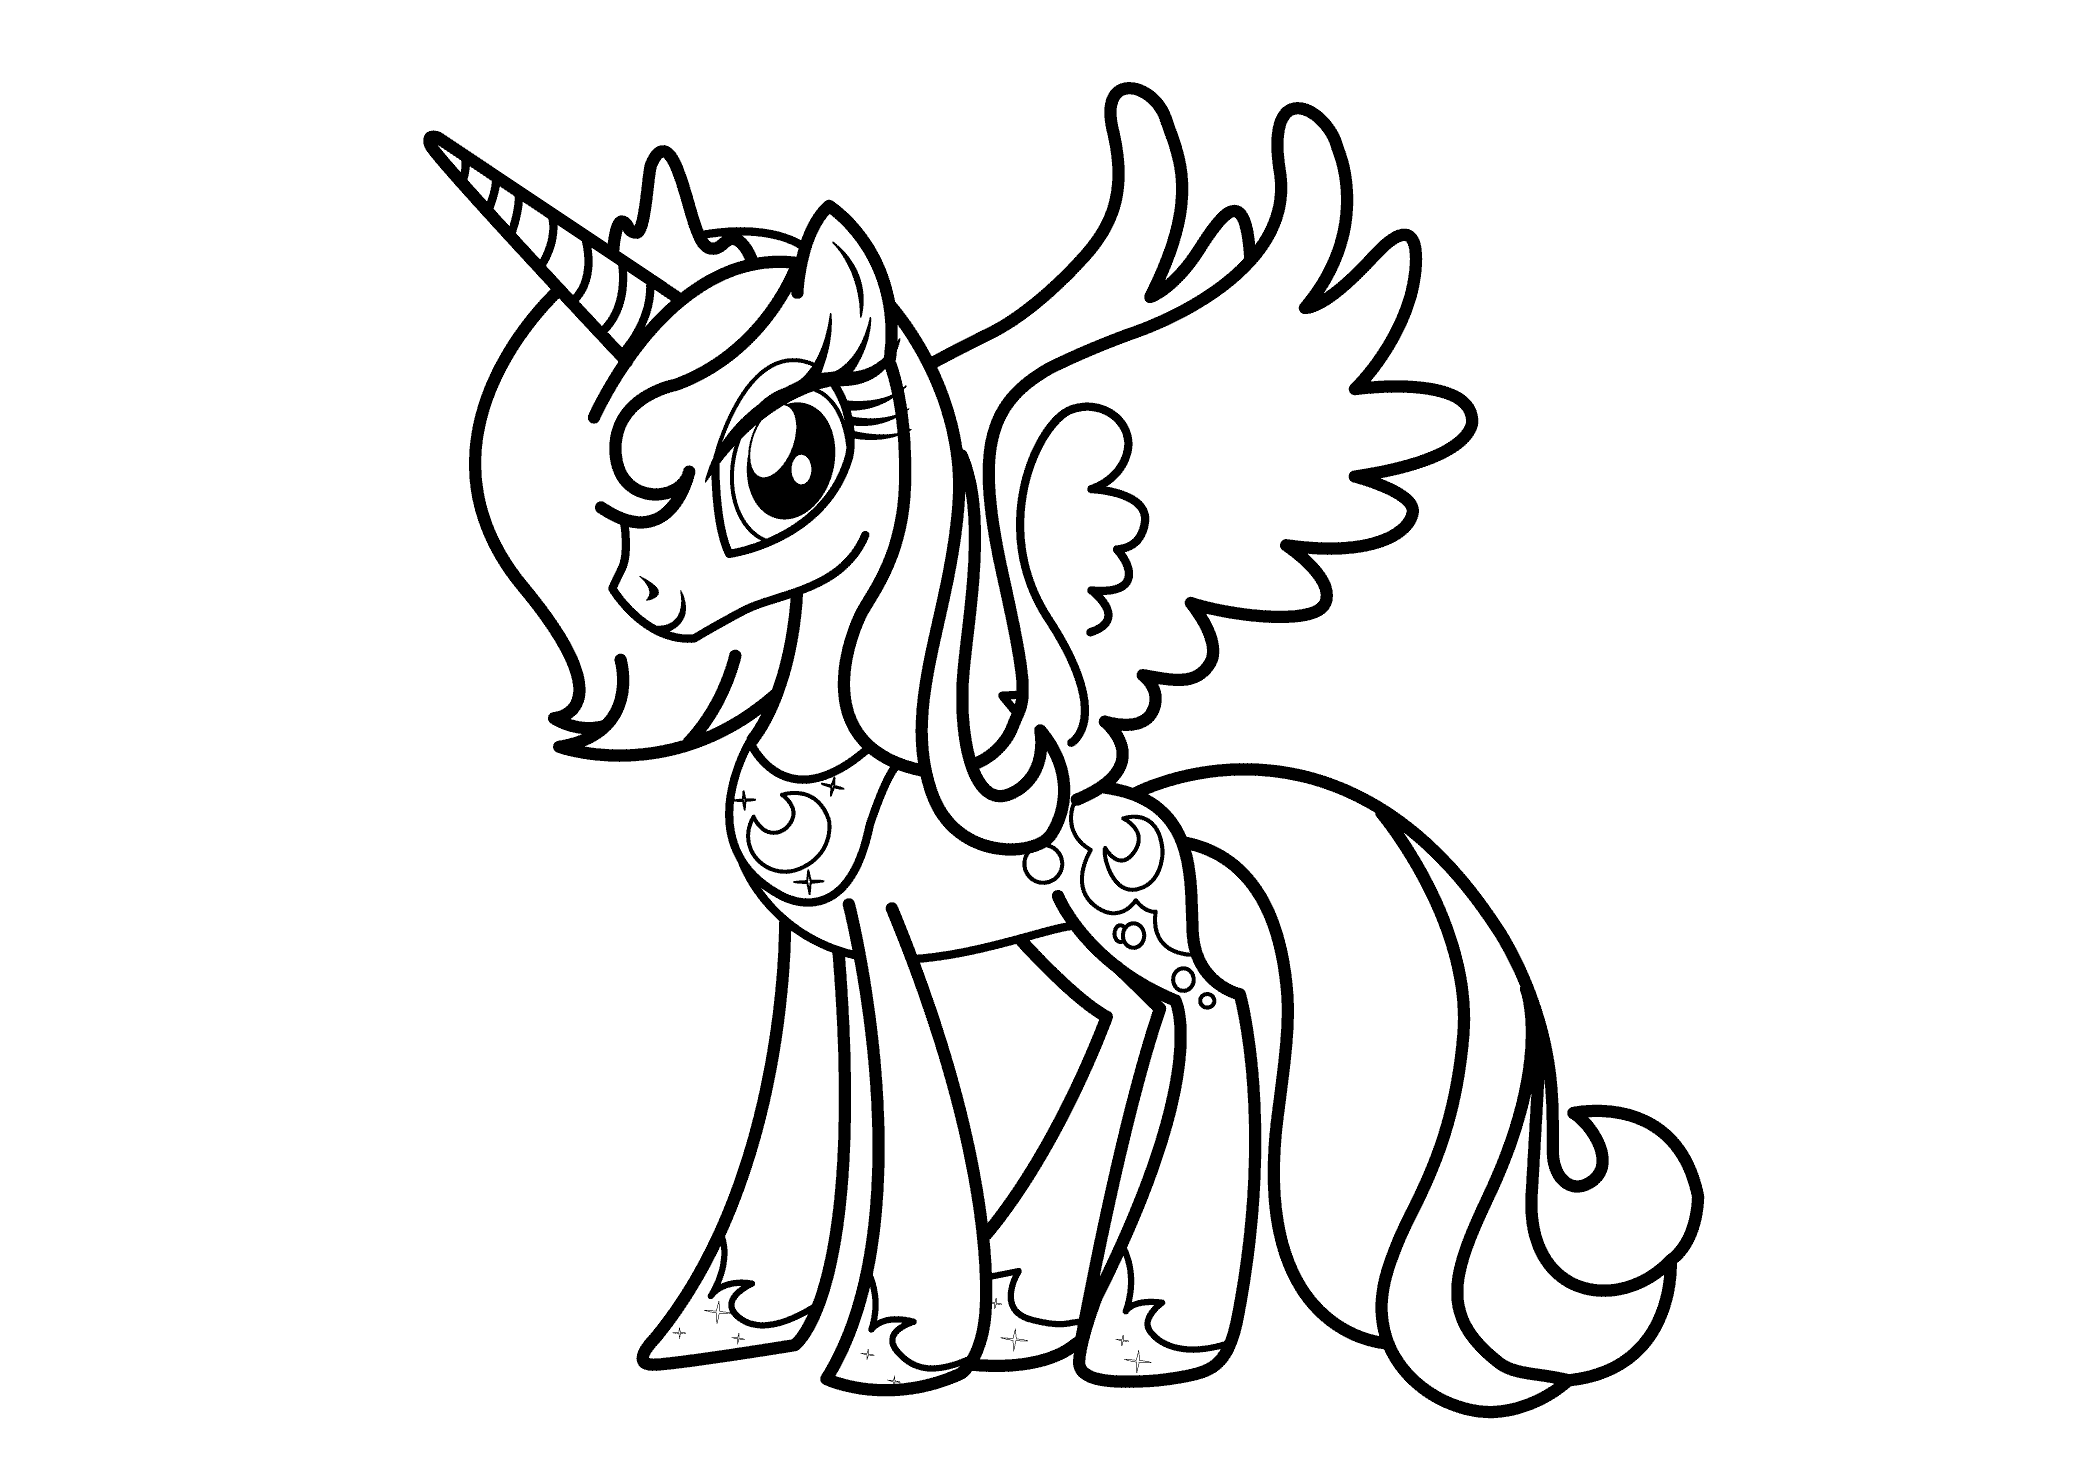 Princess Luna Coloring Pages   Best Coloring Pages For Kids